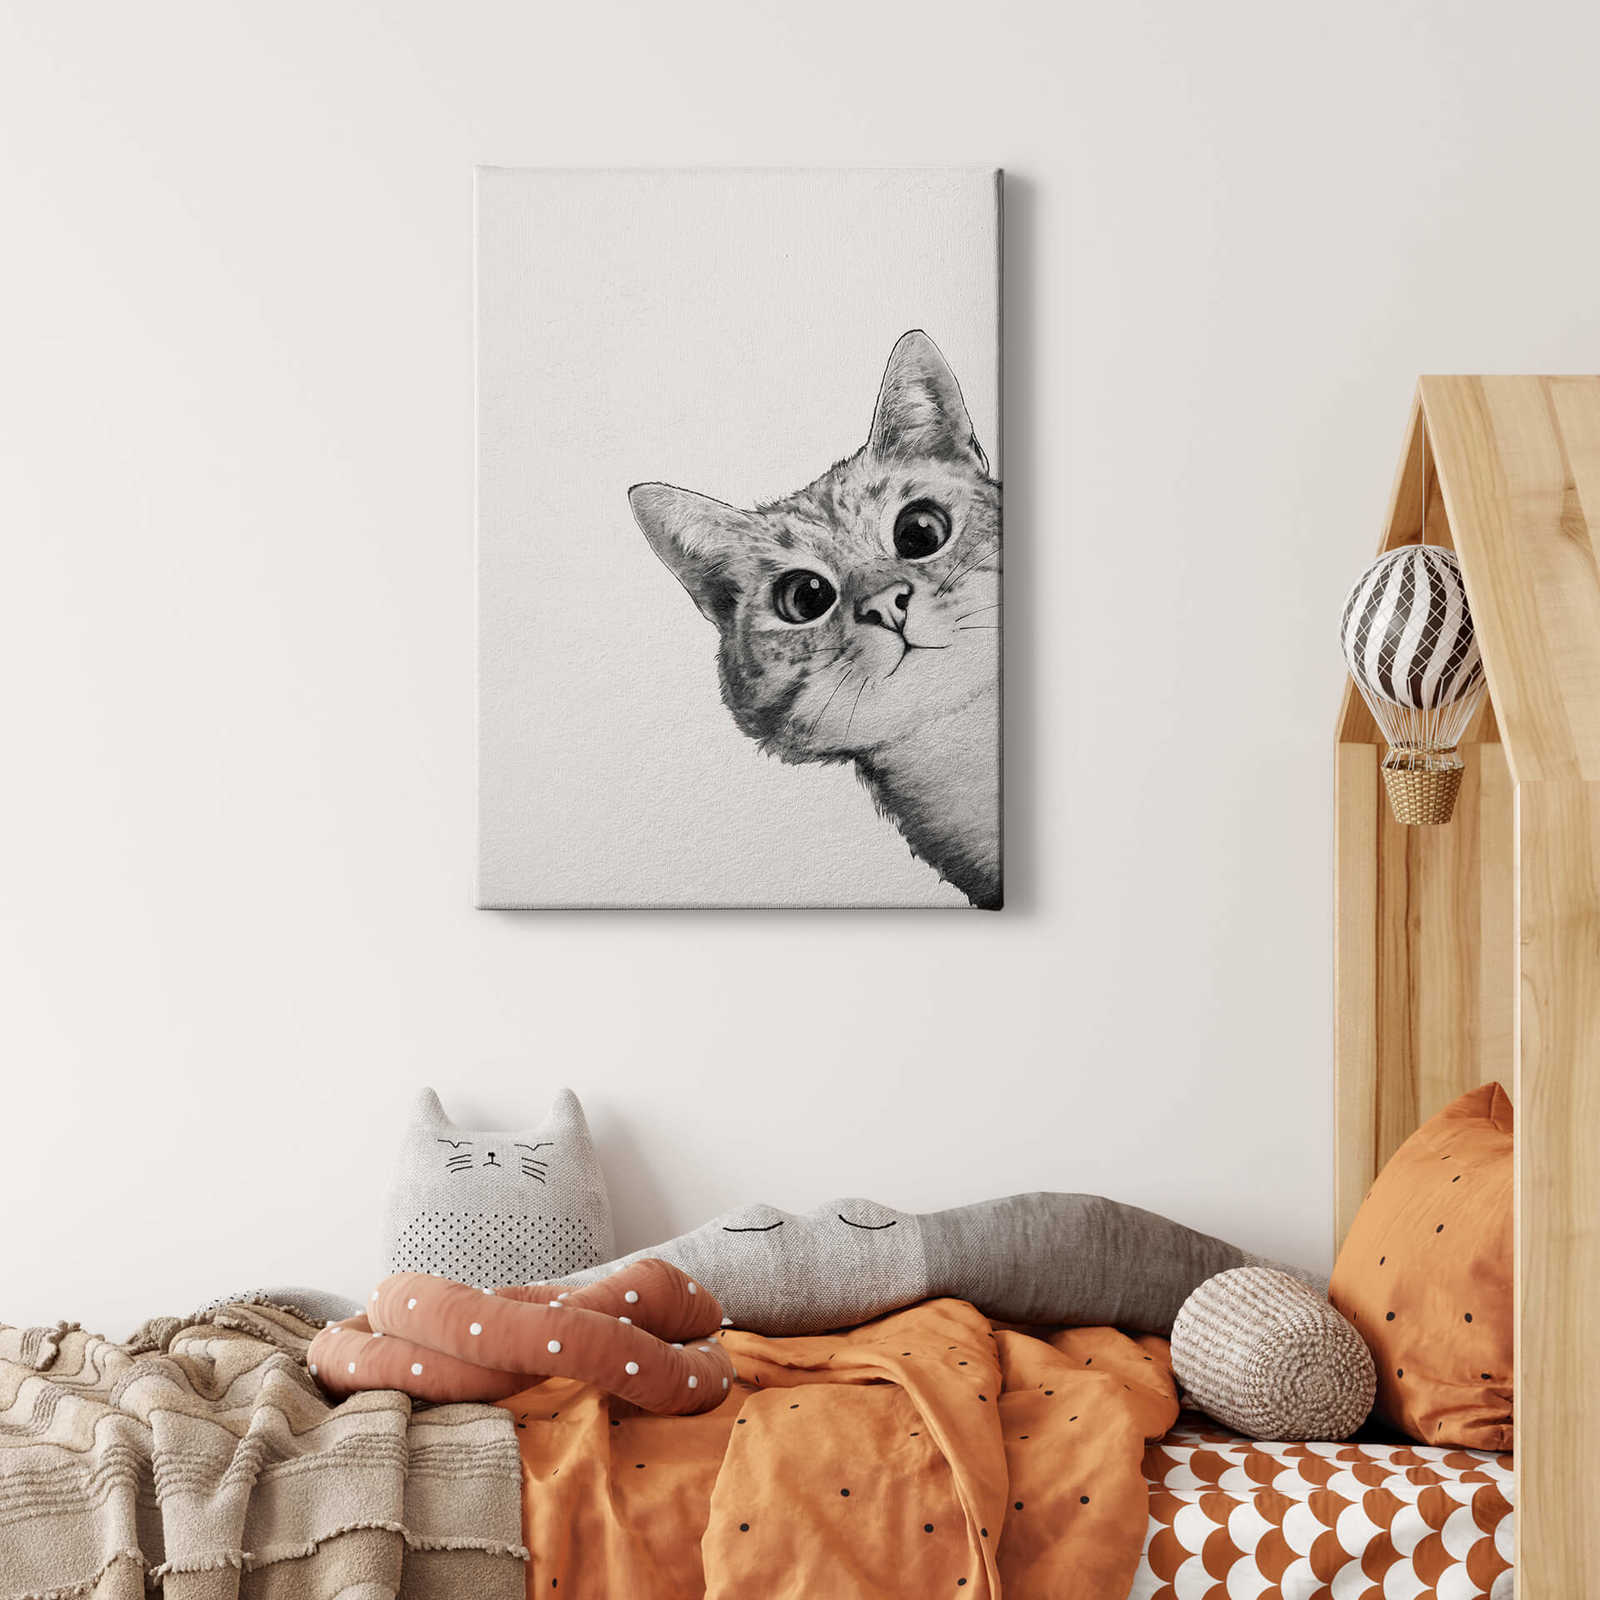             Canvas print "Sneaky Cat" by Graves, cat in black and white
        